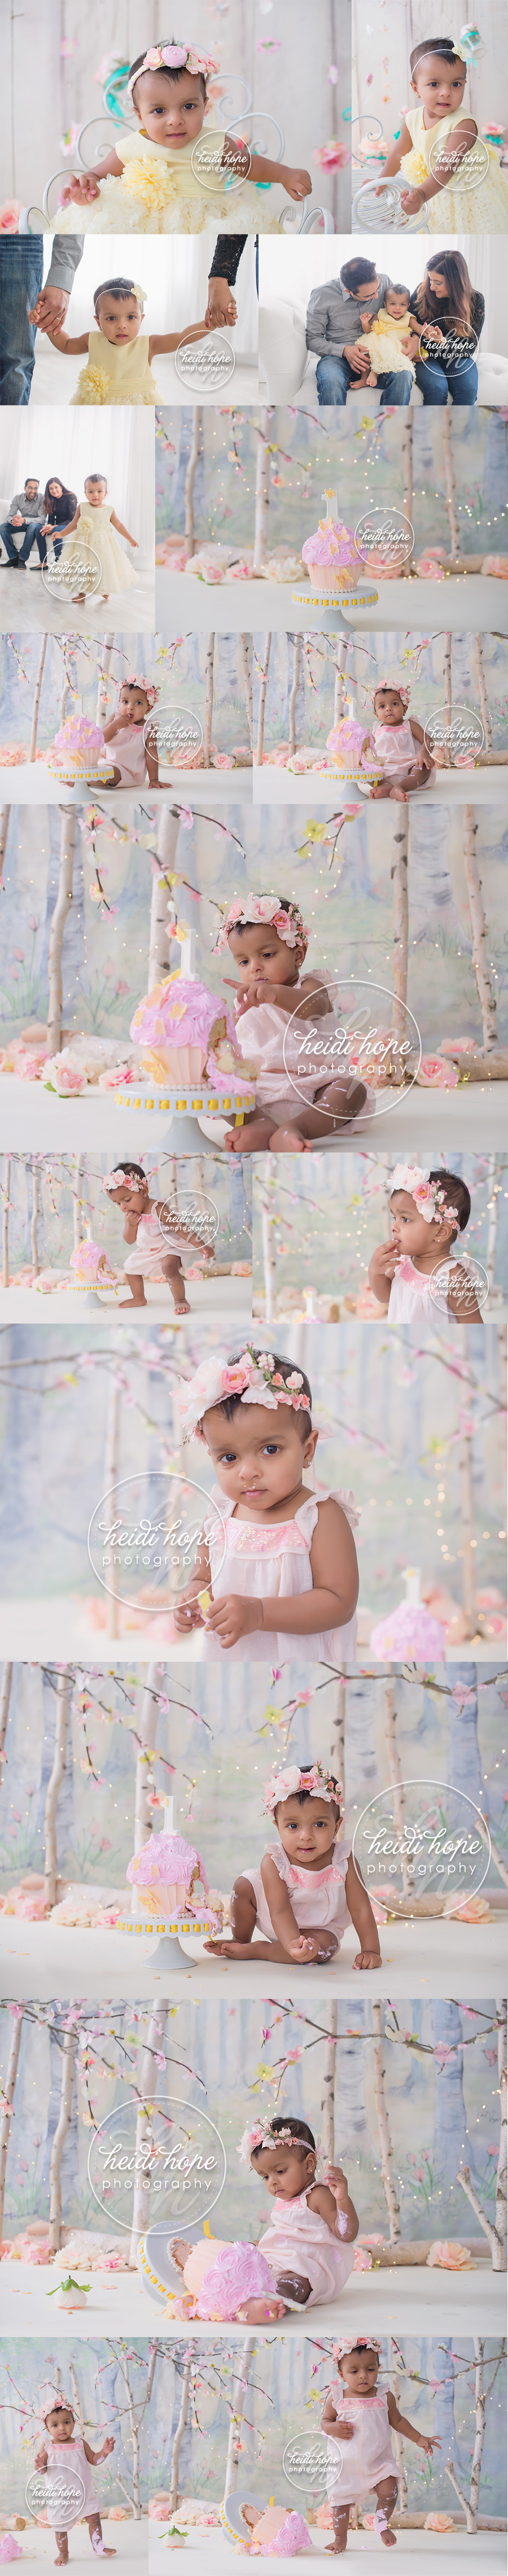 a-girly-cakesmash-by-boston-baby-photographer-heidi-hope-with-hand-painted-birch-background